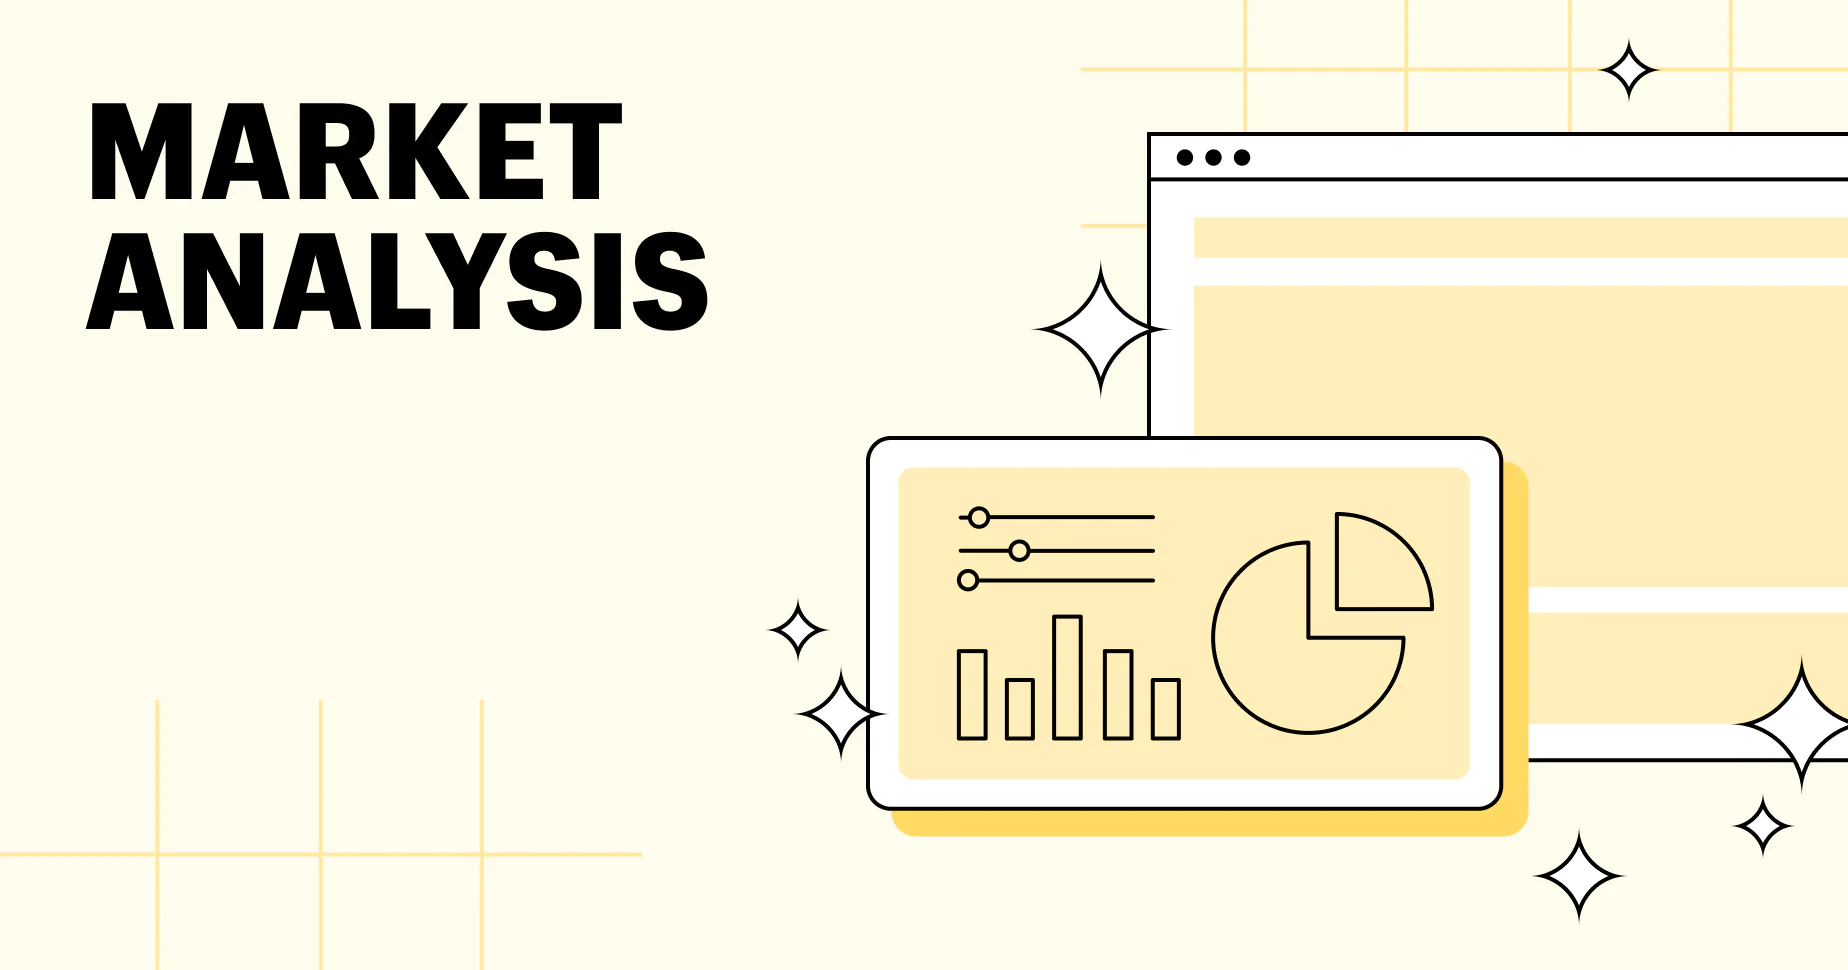 5 STEPS TO A GOOD MARKET ANALYSIS FOR YOUR STARTUP (AKA MARKET ANALYSIS 101)